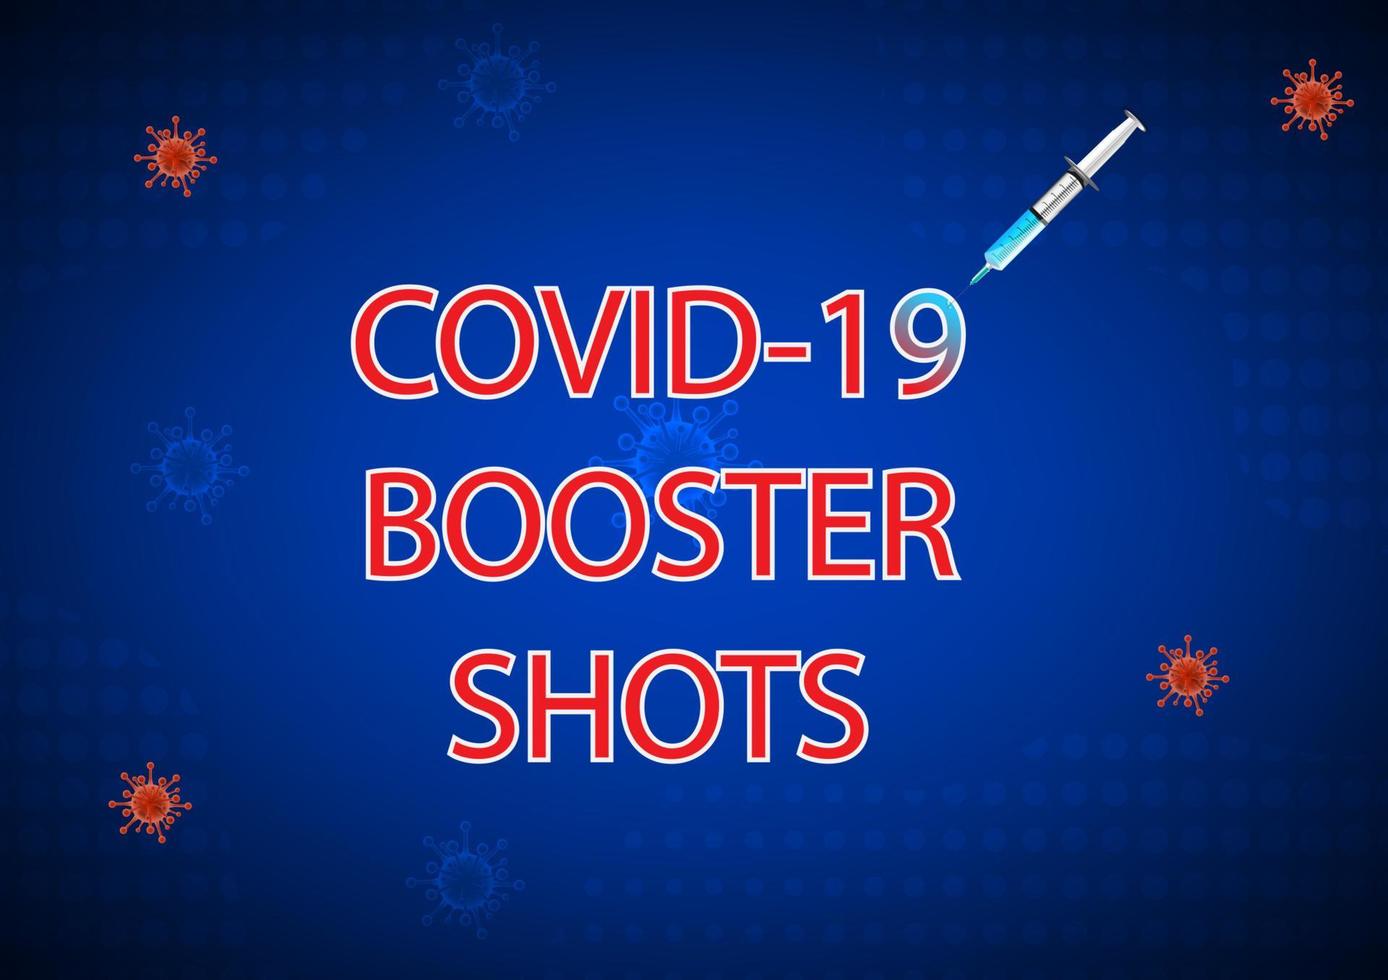 concept idea COVID-19 vaccine boosters can further enhance or restore protection, vector illustration